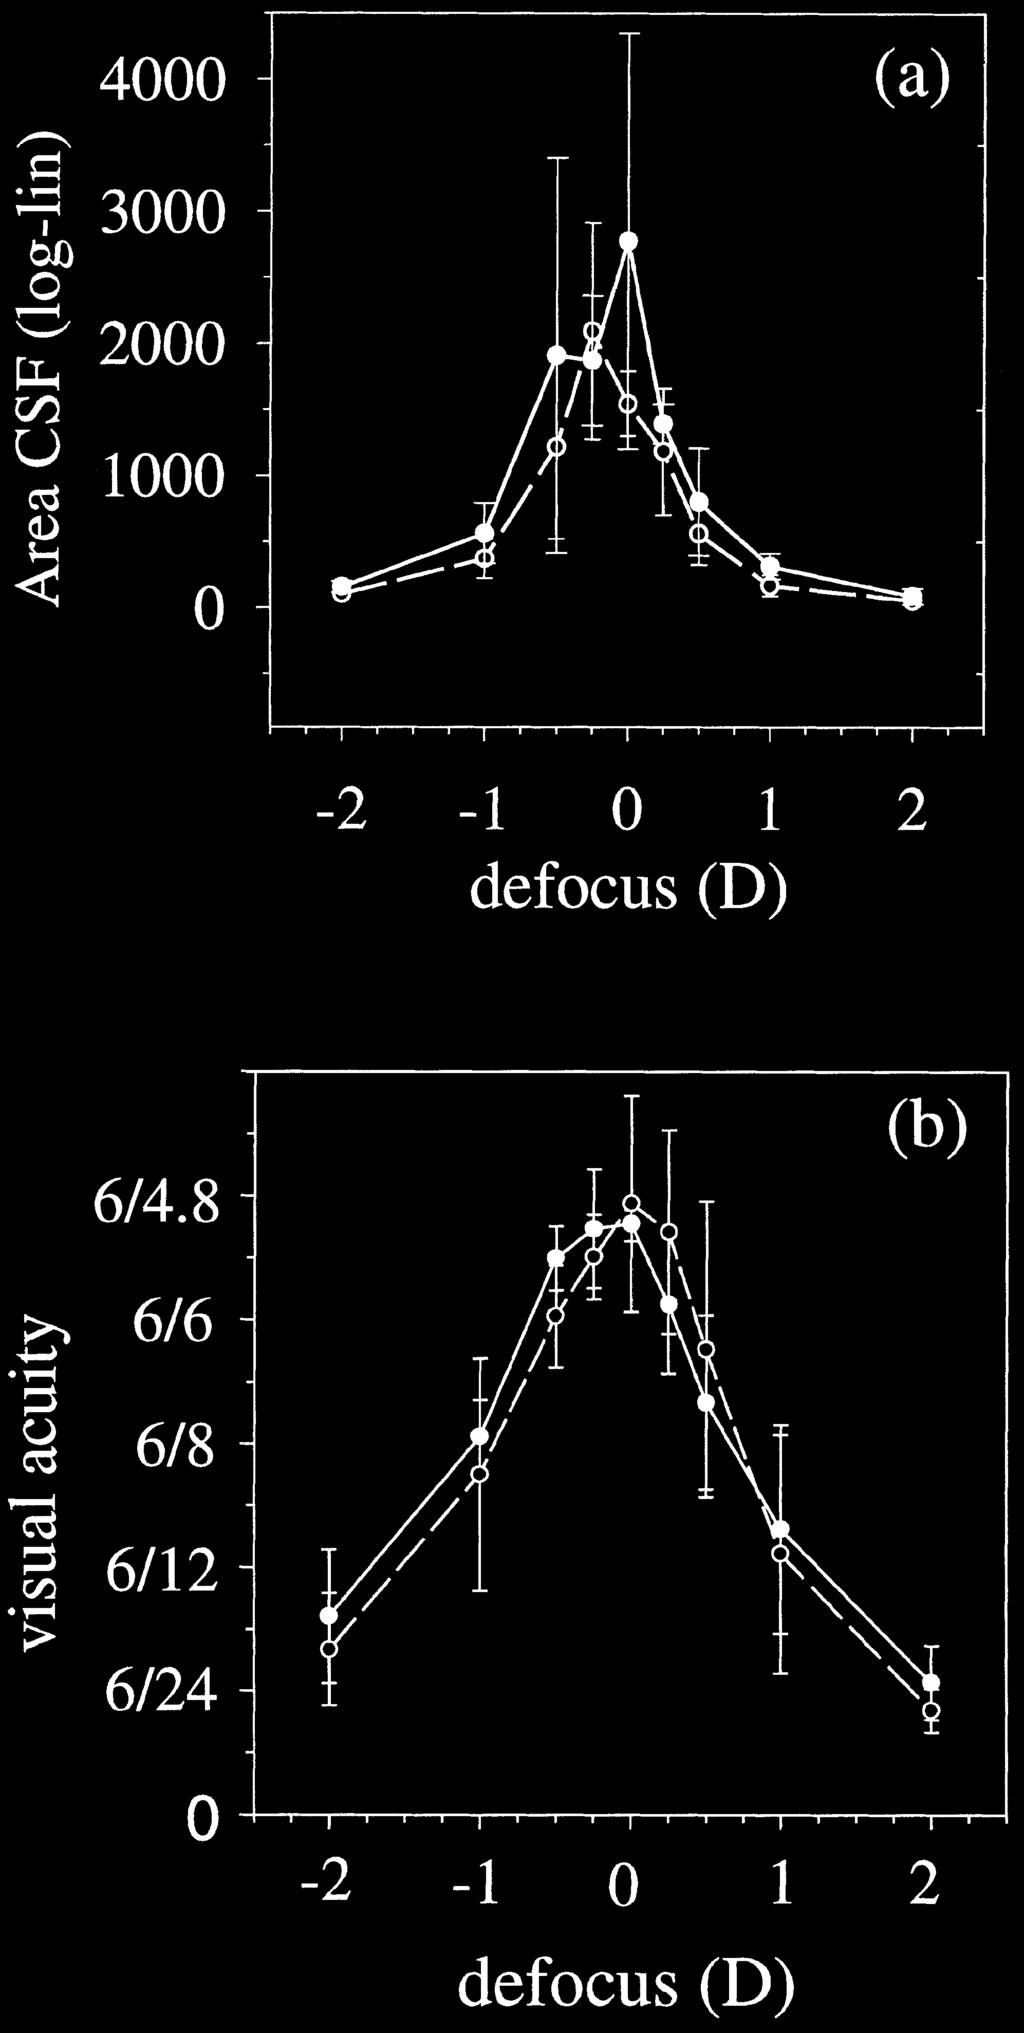 6 Effects of Defocus Villegas FIGURE 7. (A) Average Area CSF (log-lin) and (B) visual acuity as a function of defocus for 3-mm (filled circles) and 5-mm (open circles) pupil diameter.